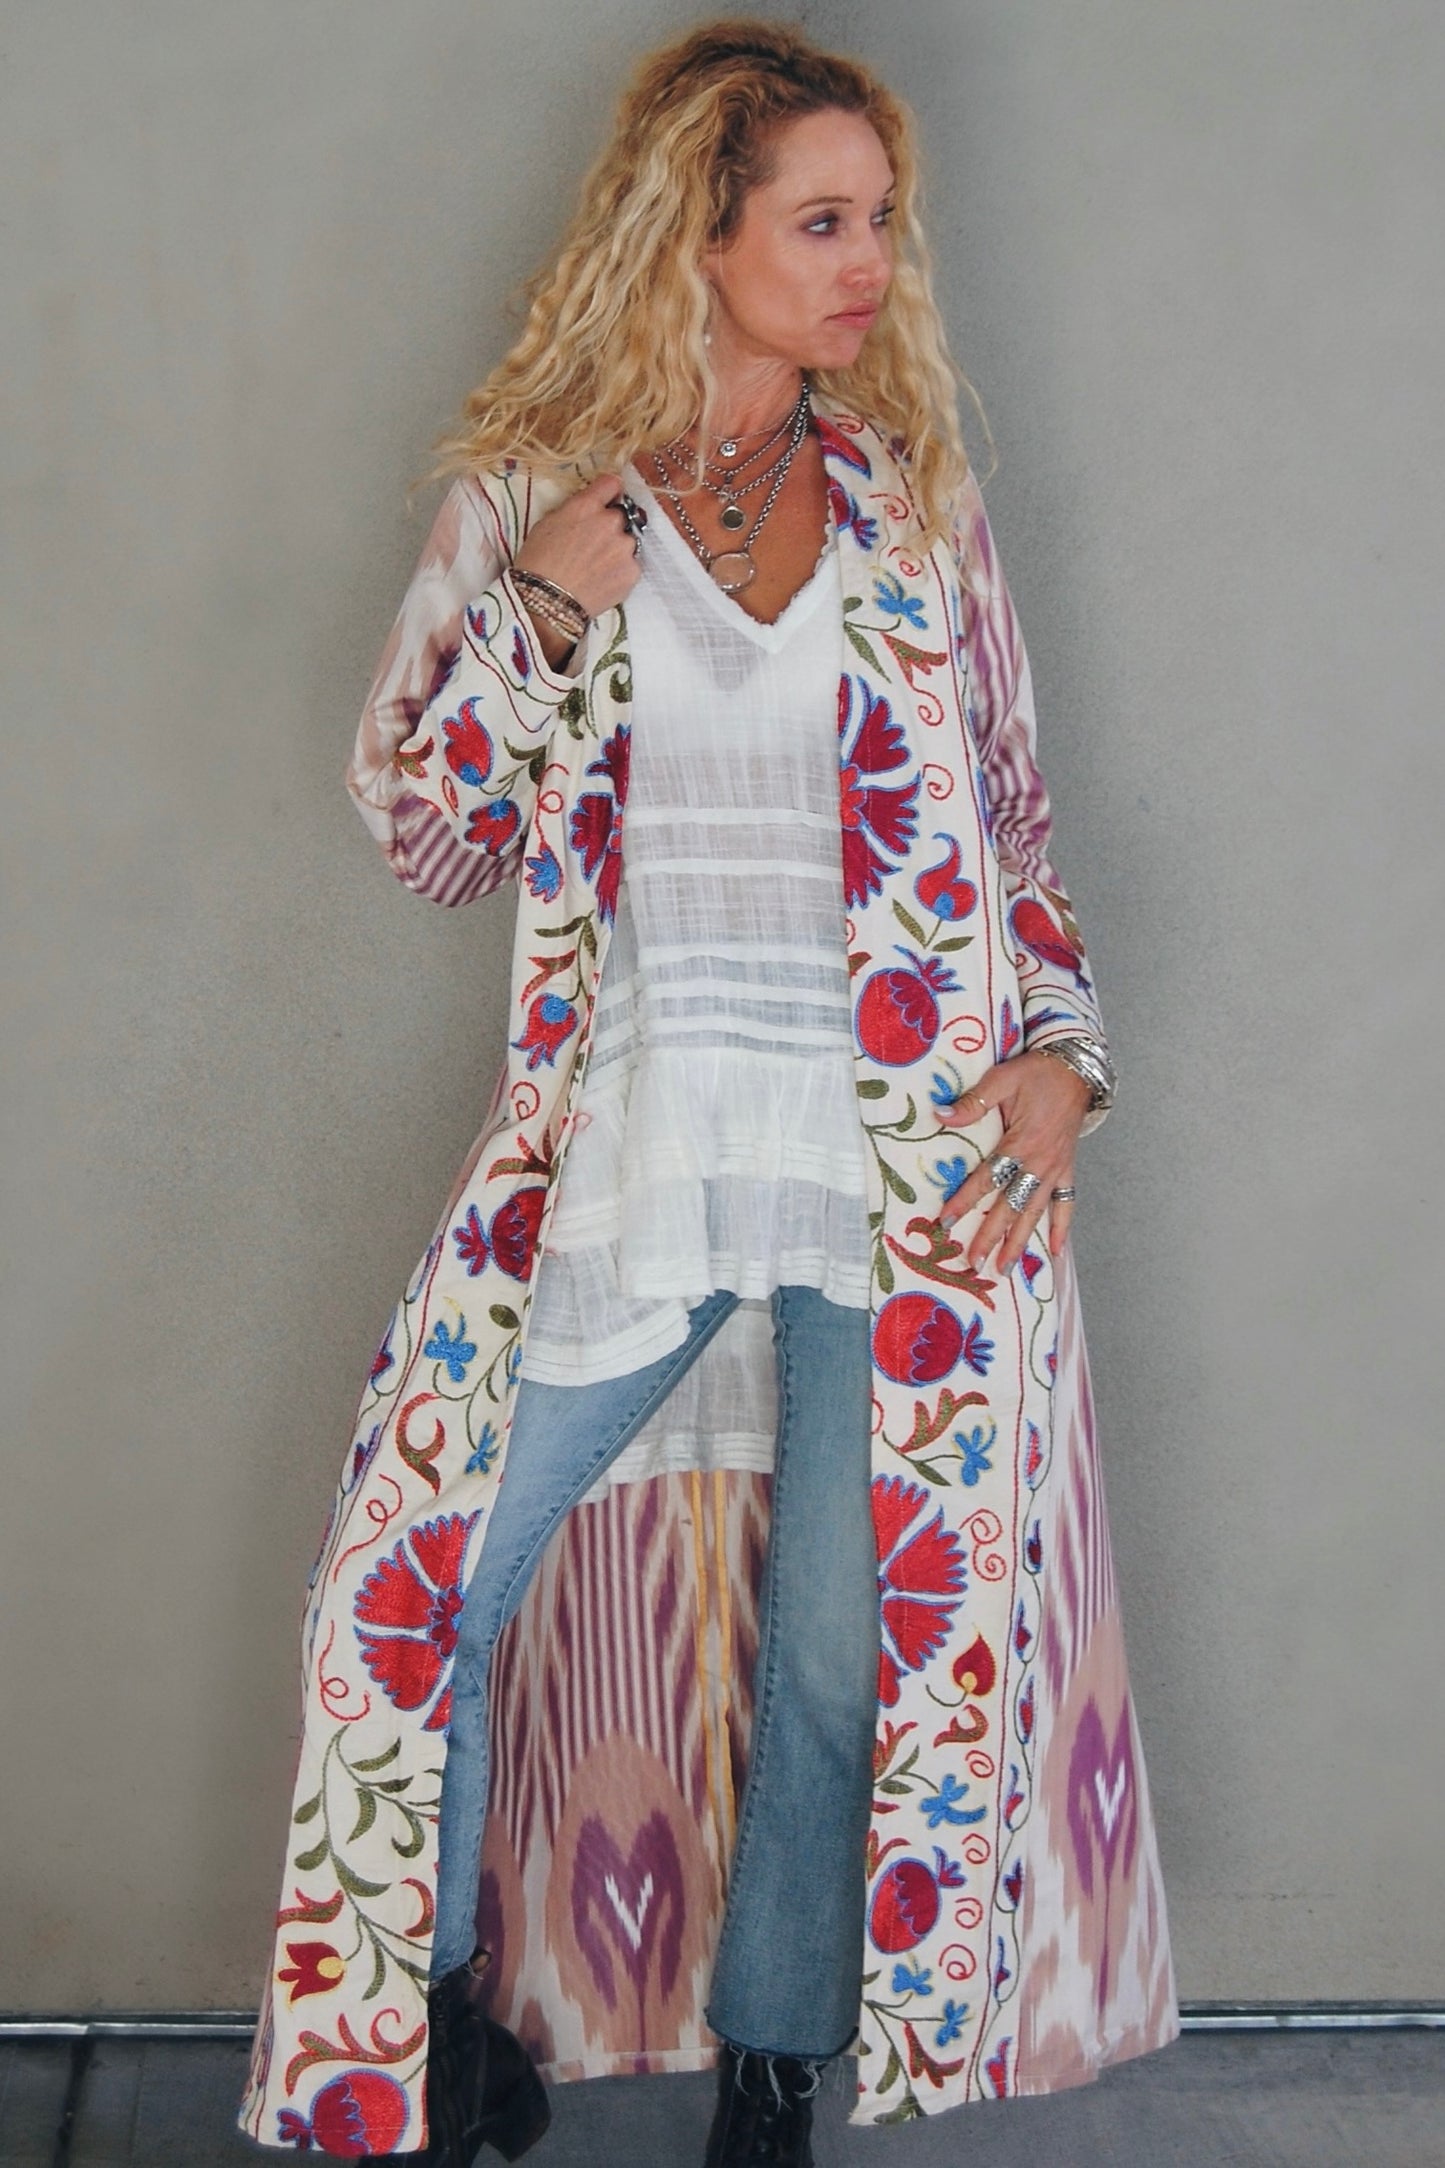 Load image into Gallery viewer, The Ellis Jacket in Whimsical - SpiritedBoutiques Boho Hippie Boutique Style Jacket, Spirited
